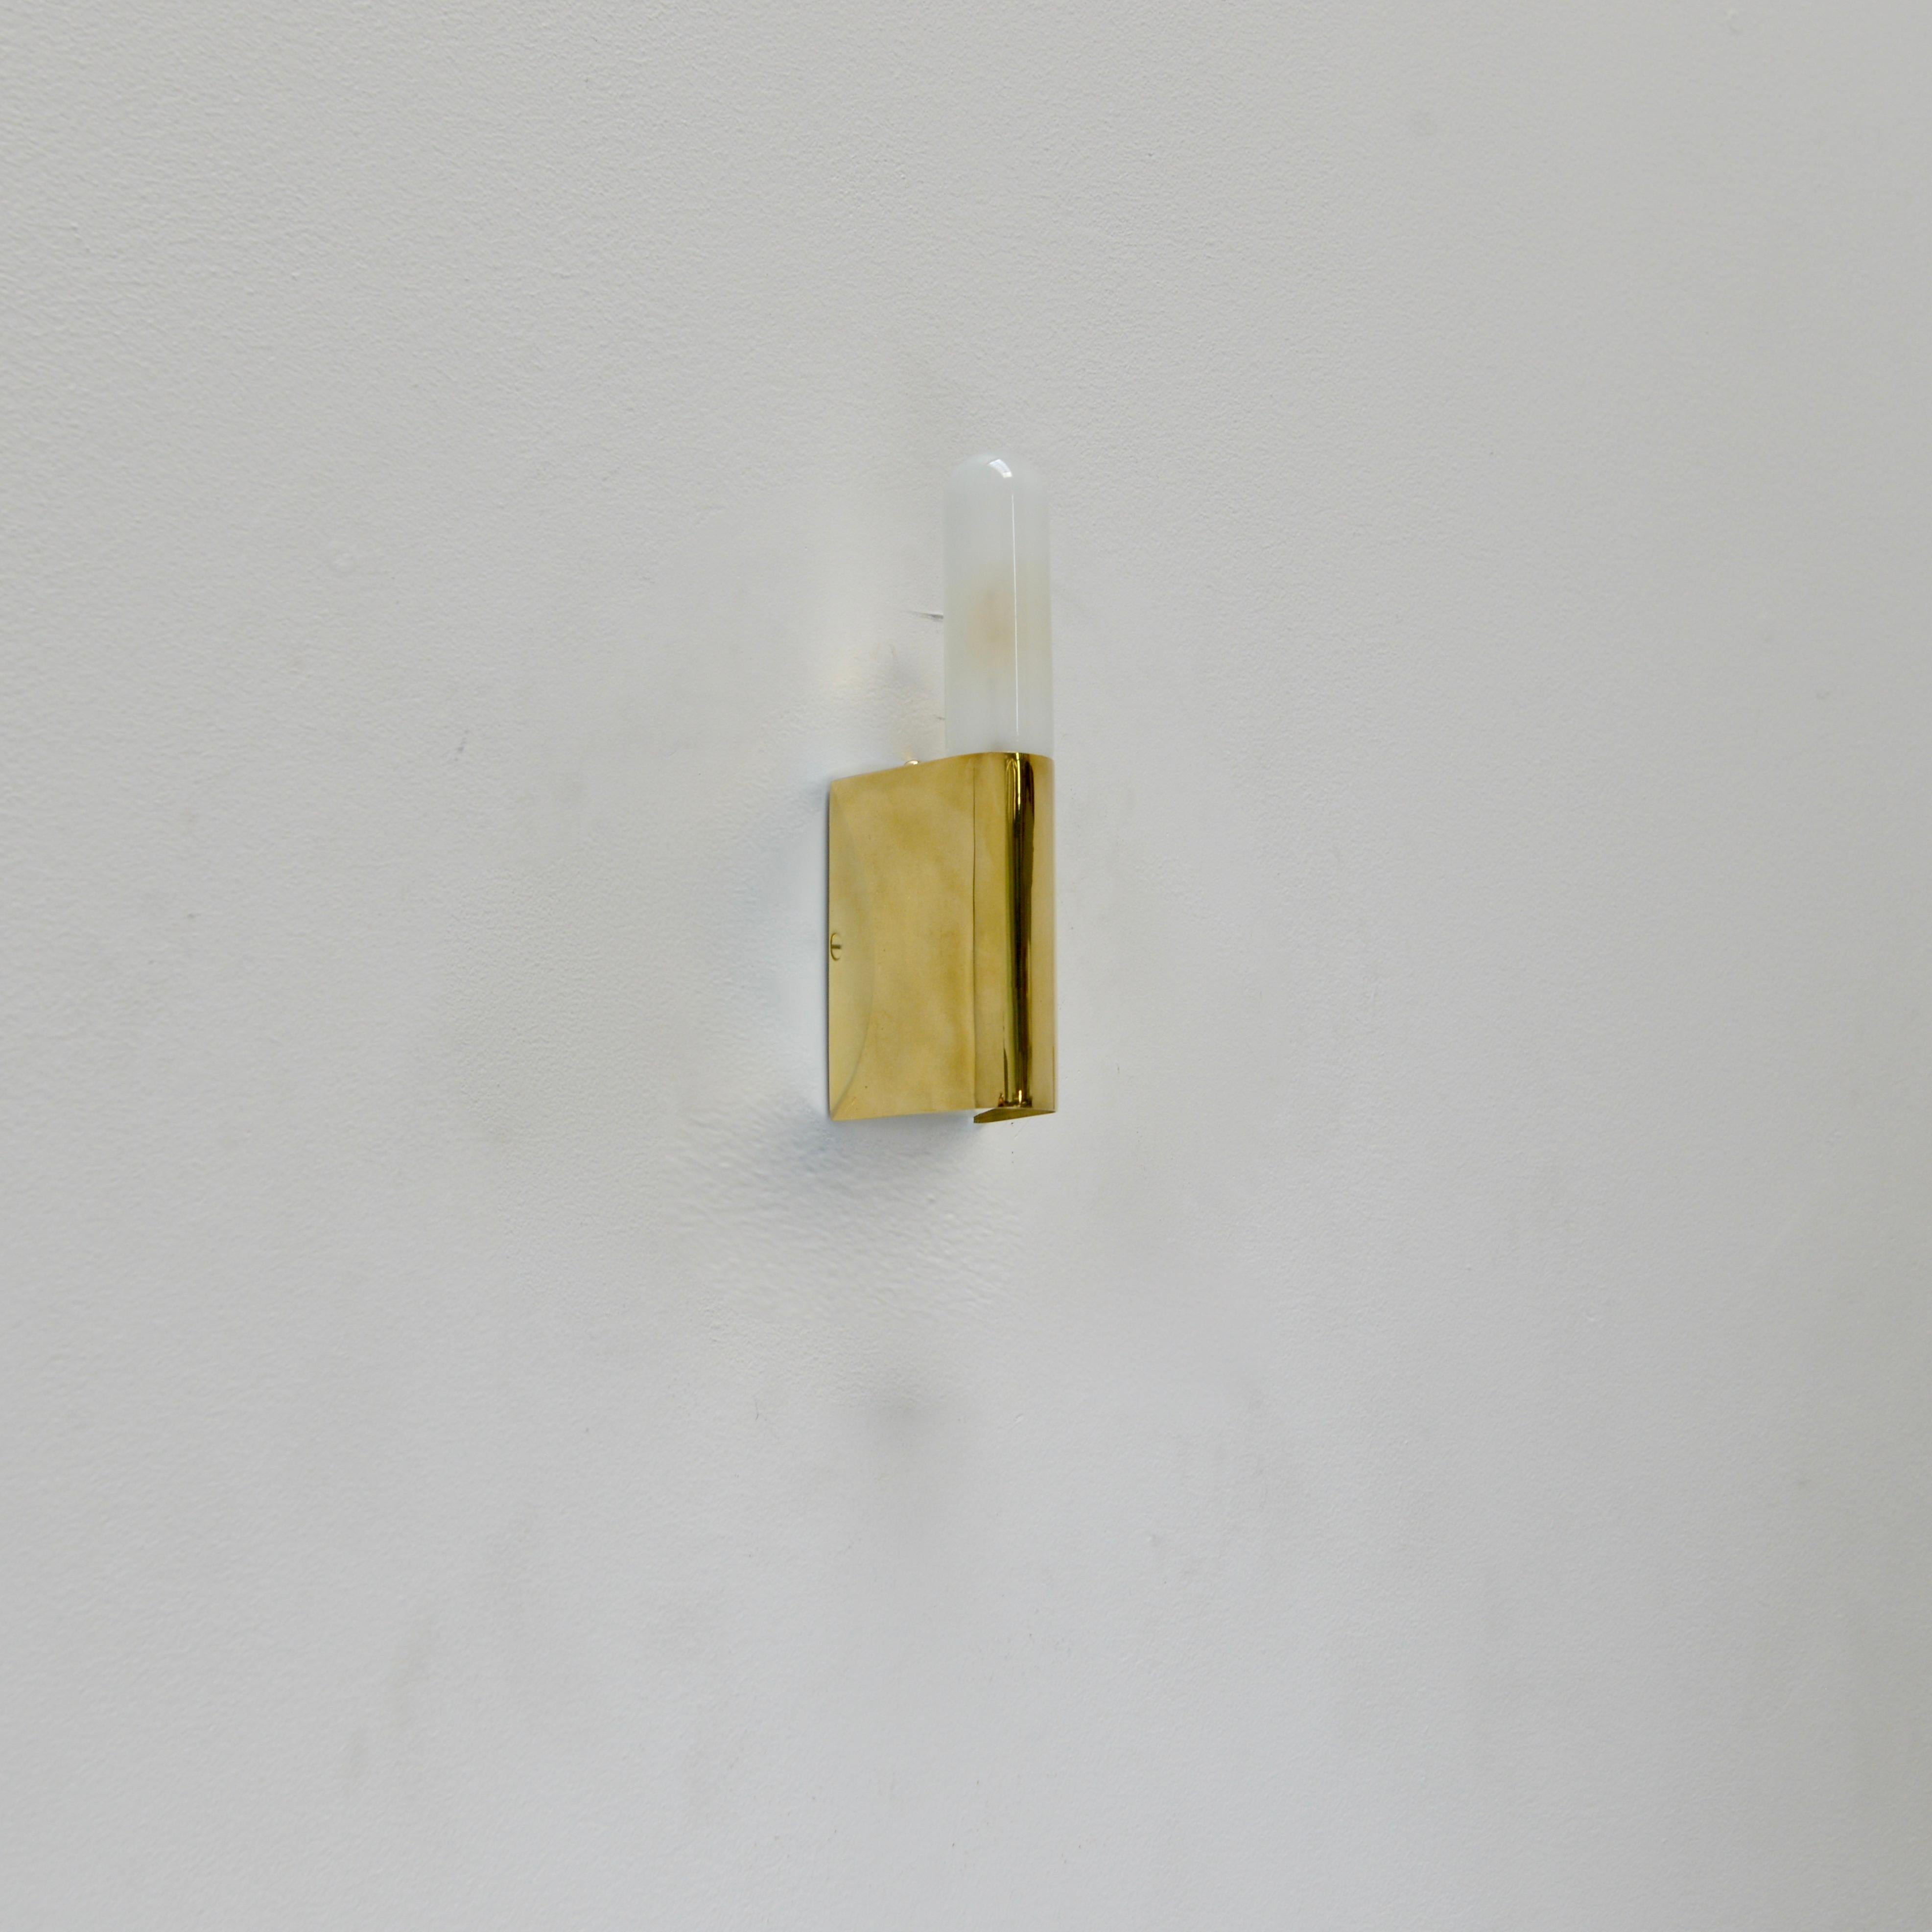 A wonderful linear sconce from 1960s, Italy. Made from brass and steel, partially restored, with original finish. (1) E26 medium based socket. Uses T-shaped bulb. Special j-box required. (see last image) Currently wired for use in the US. Lightbulbs